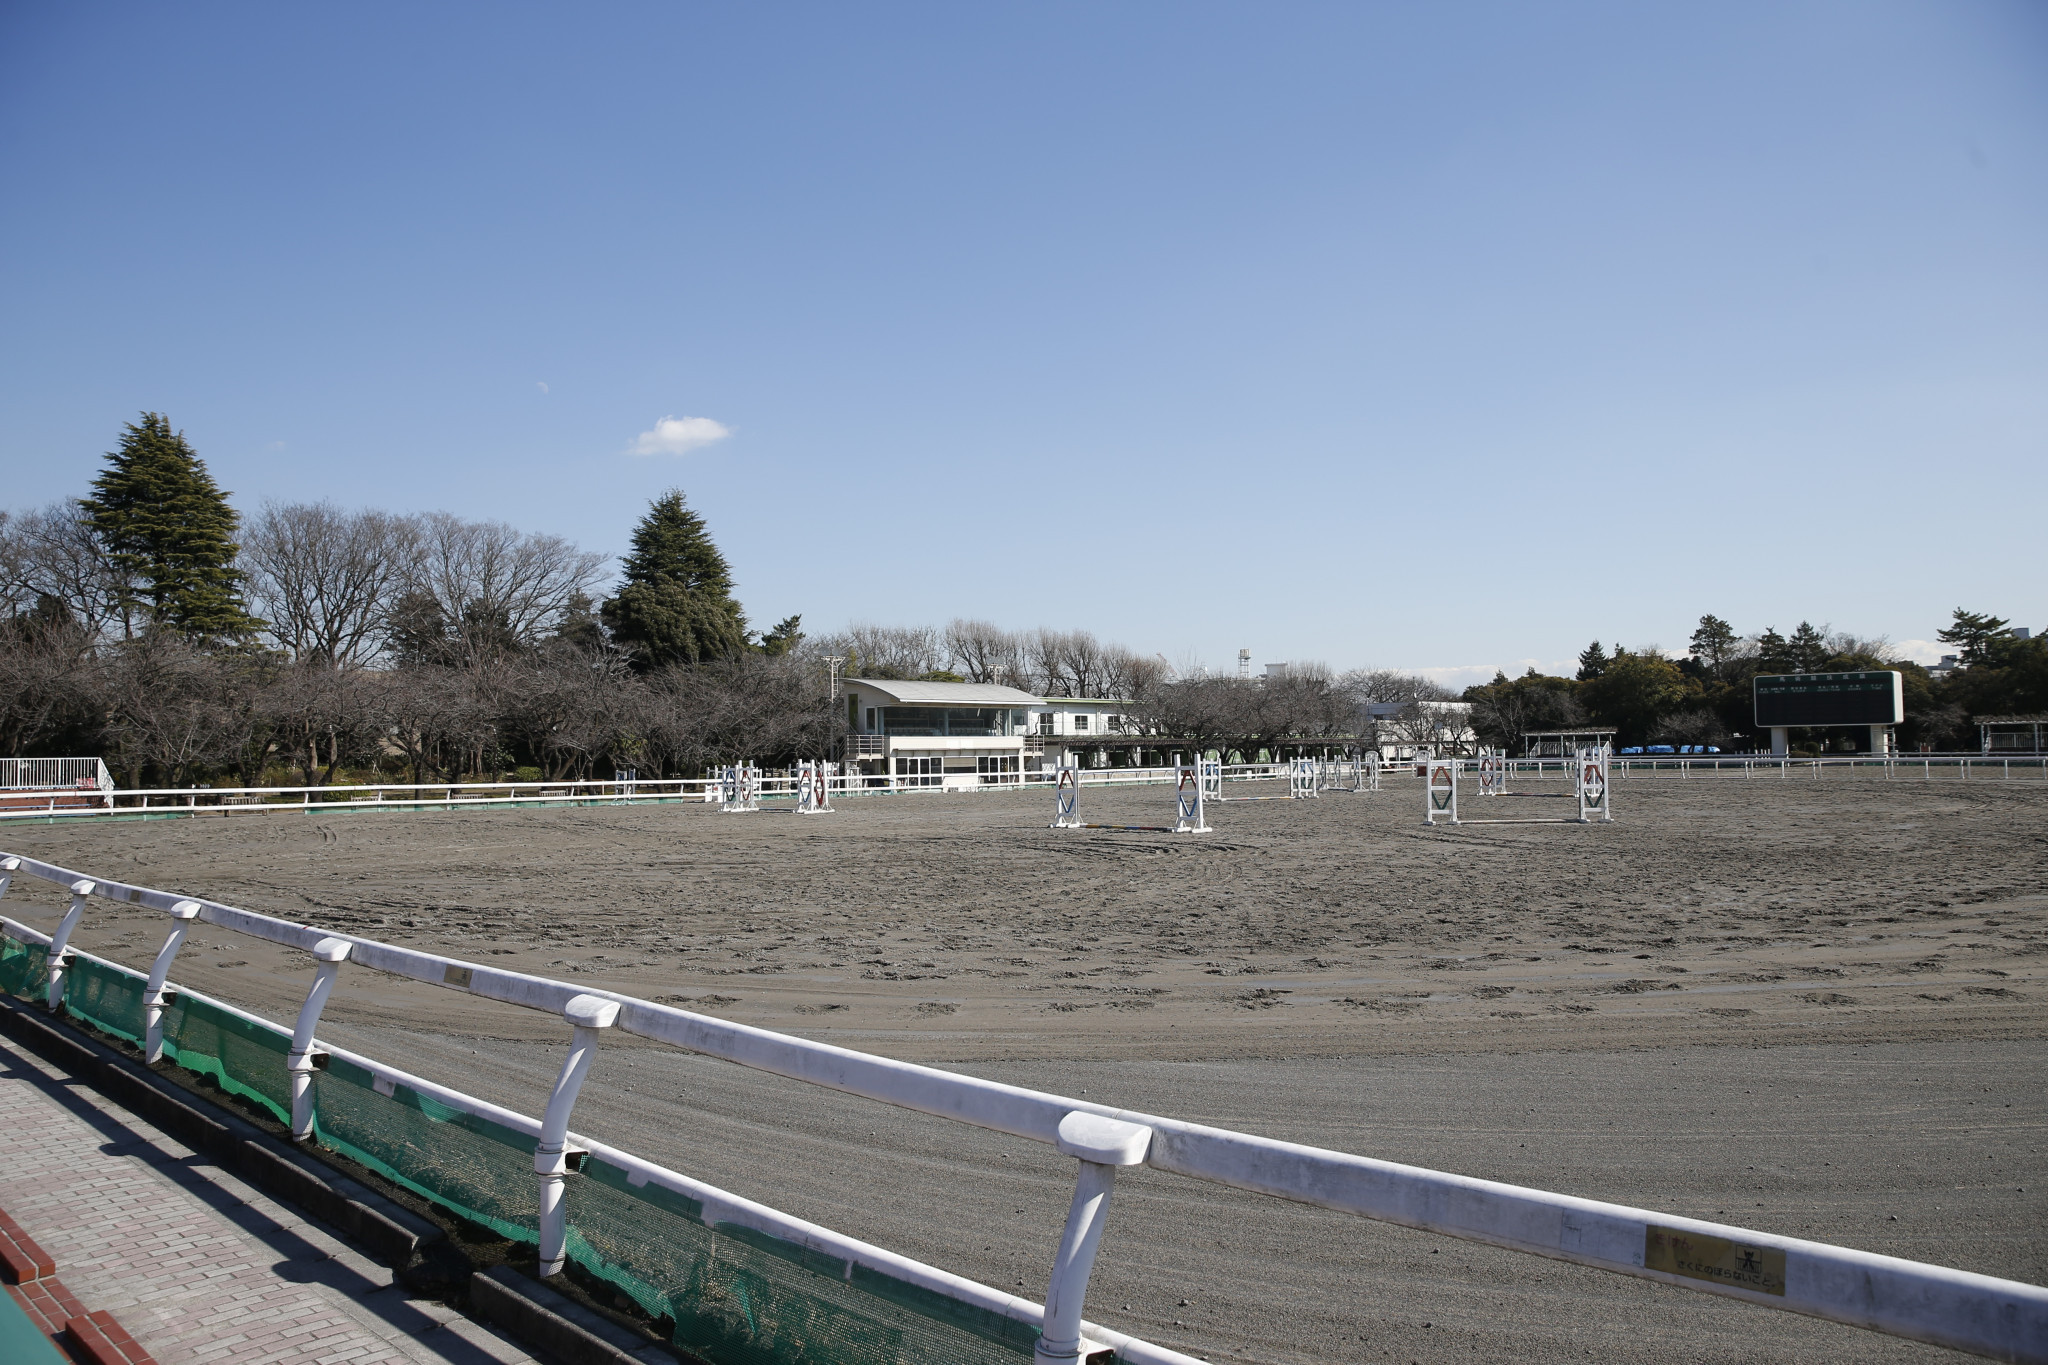 The Equestrian Park is one of several venues due to be toured by the IOC Coordination Commission ©Tokyo 2020